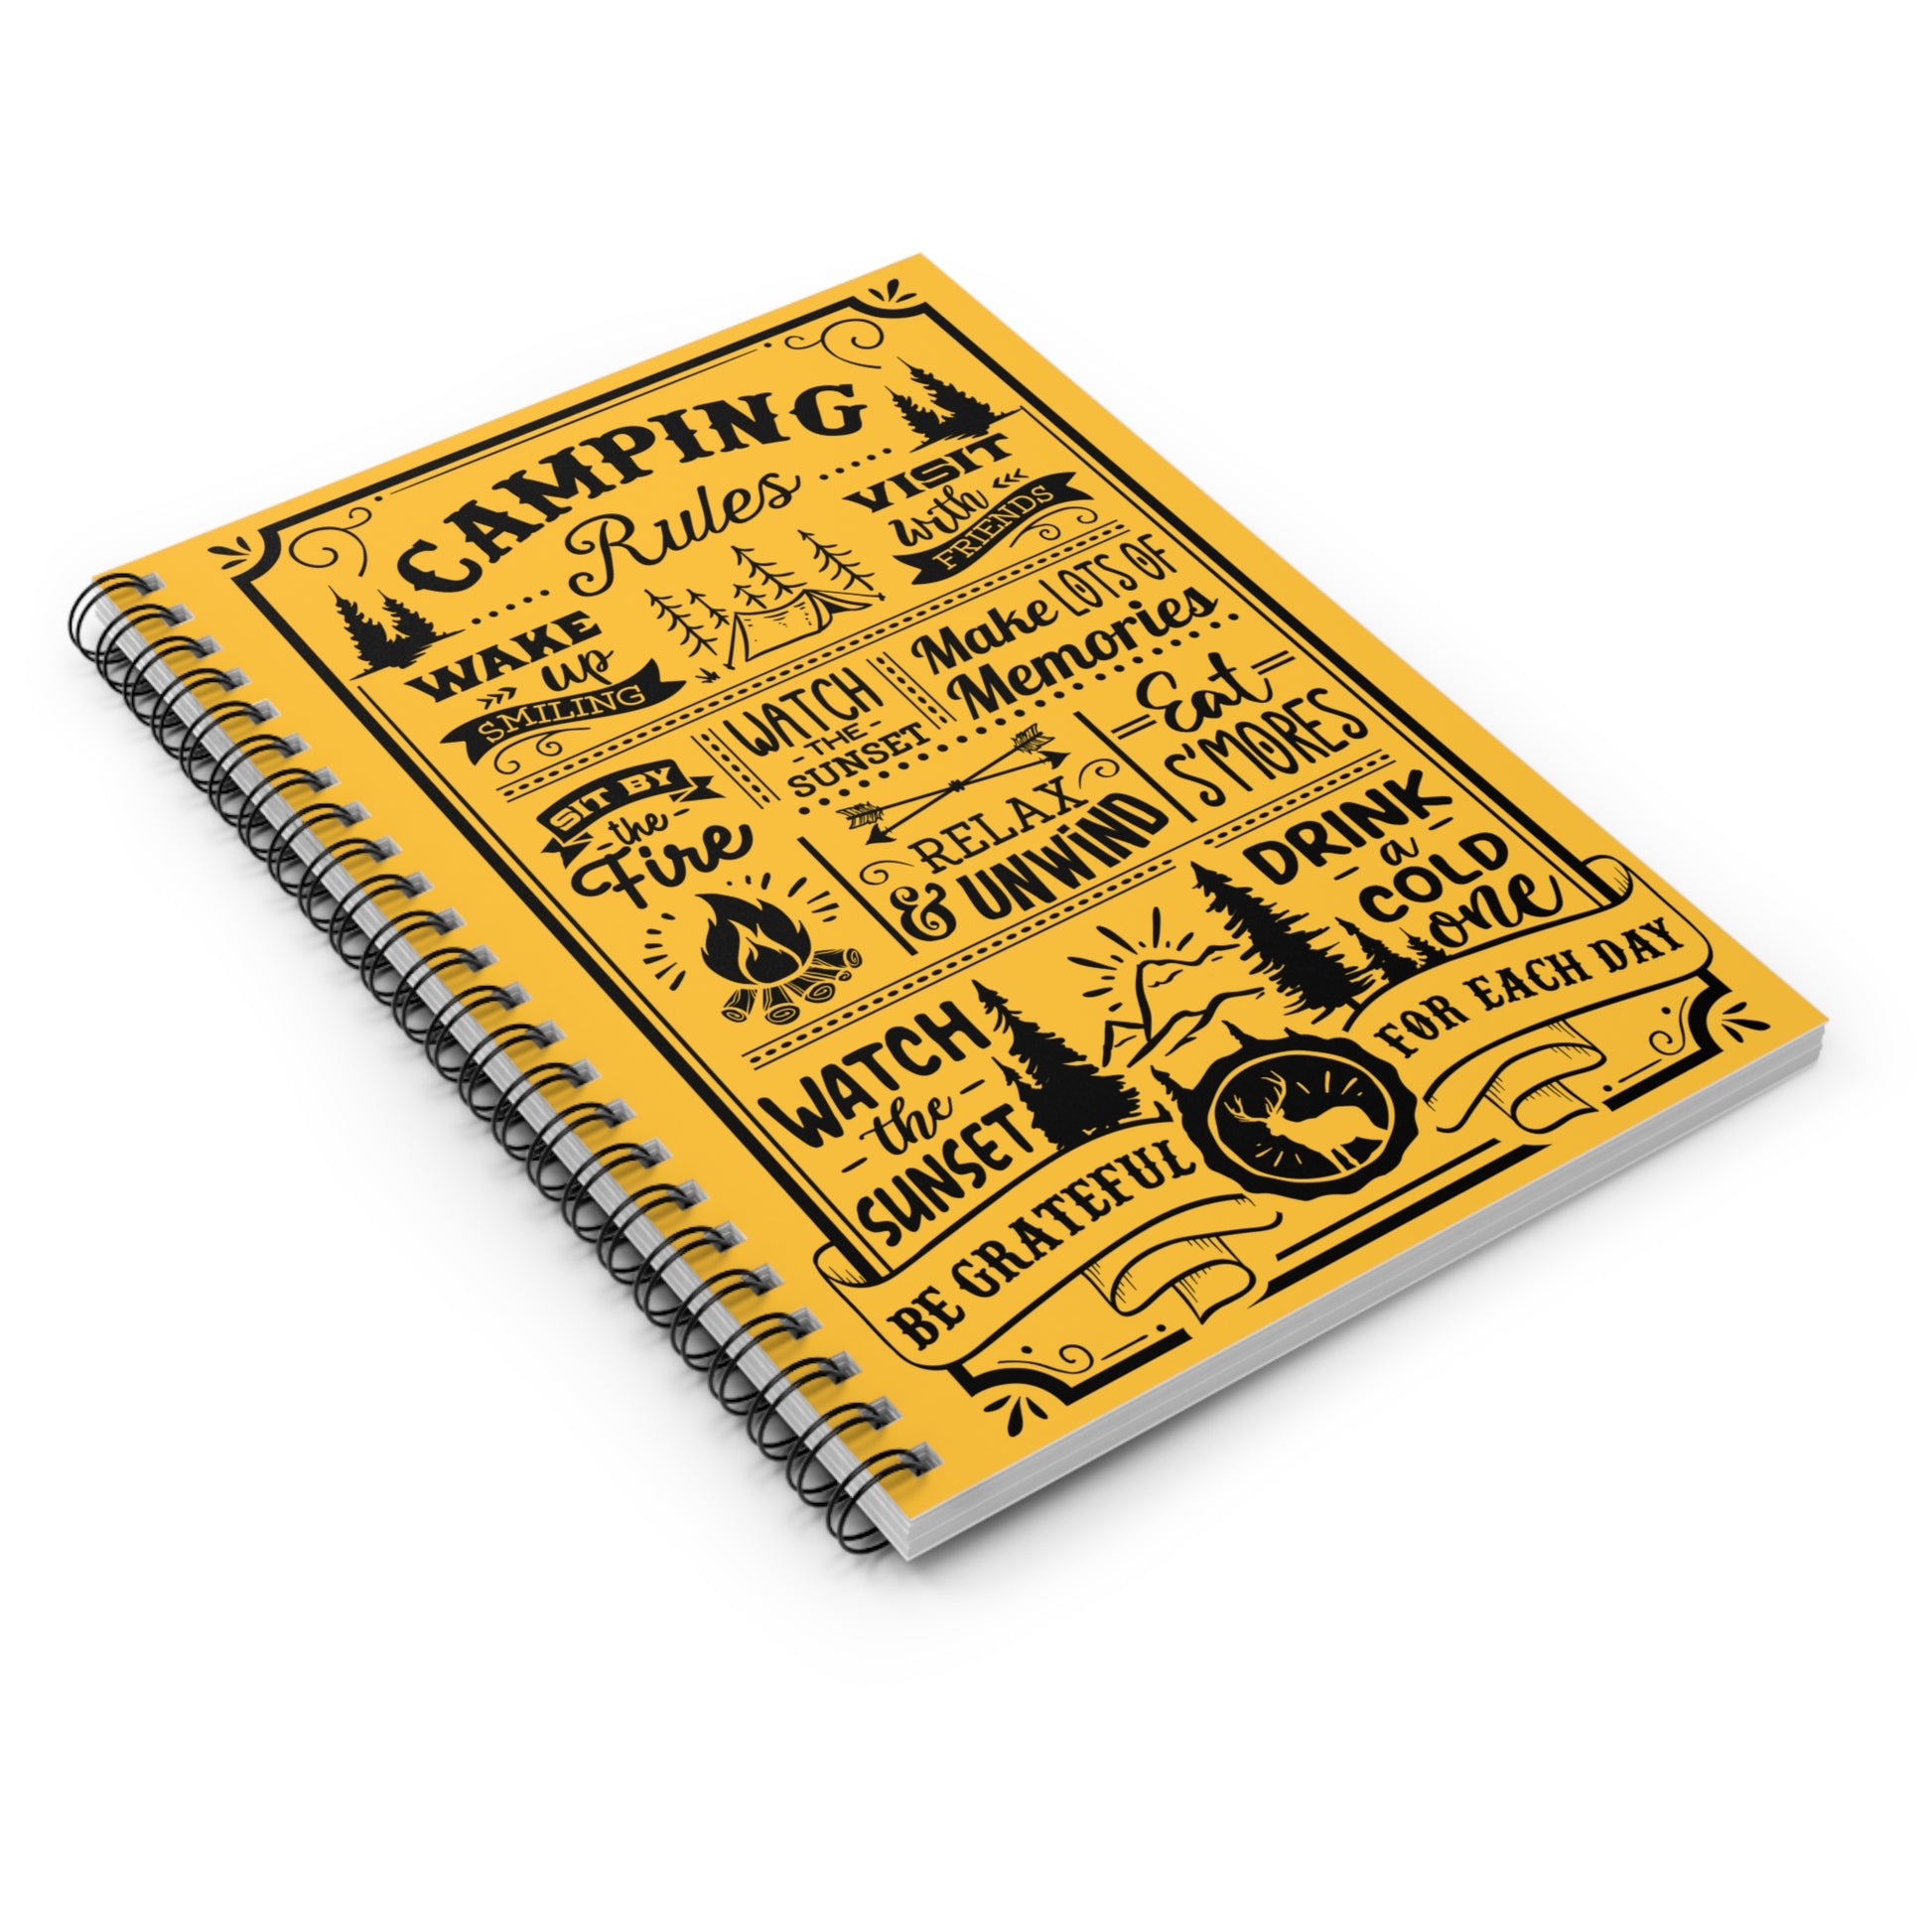 Camping Rules: Spiral Notebook - Log Books - Journals - Diaries - and More Custom Printed by TheGlassyLass.com